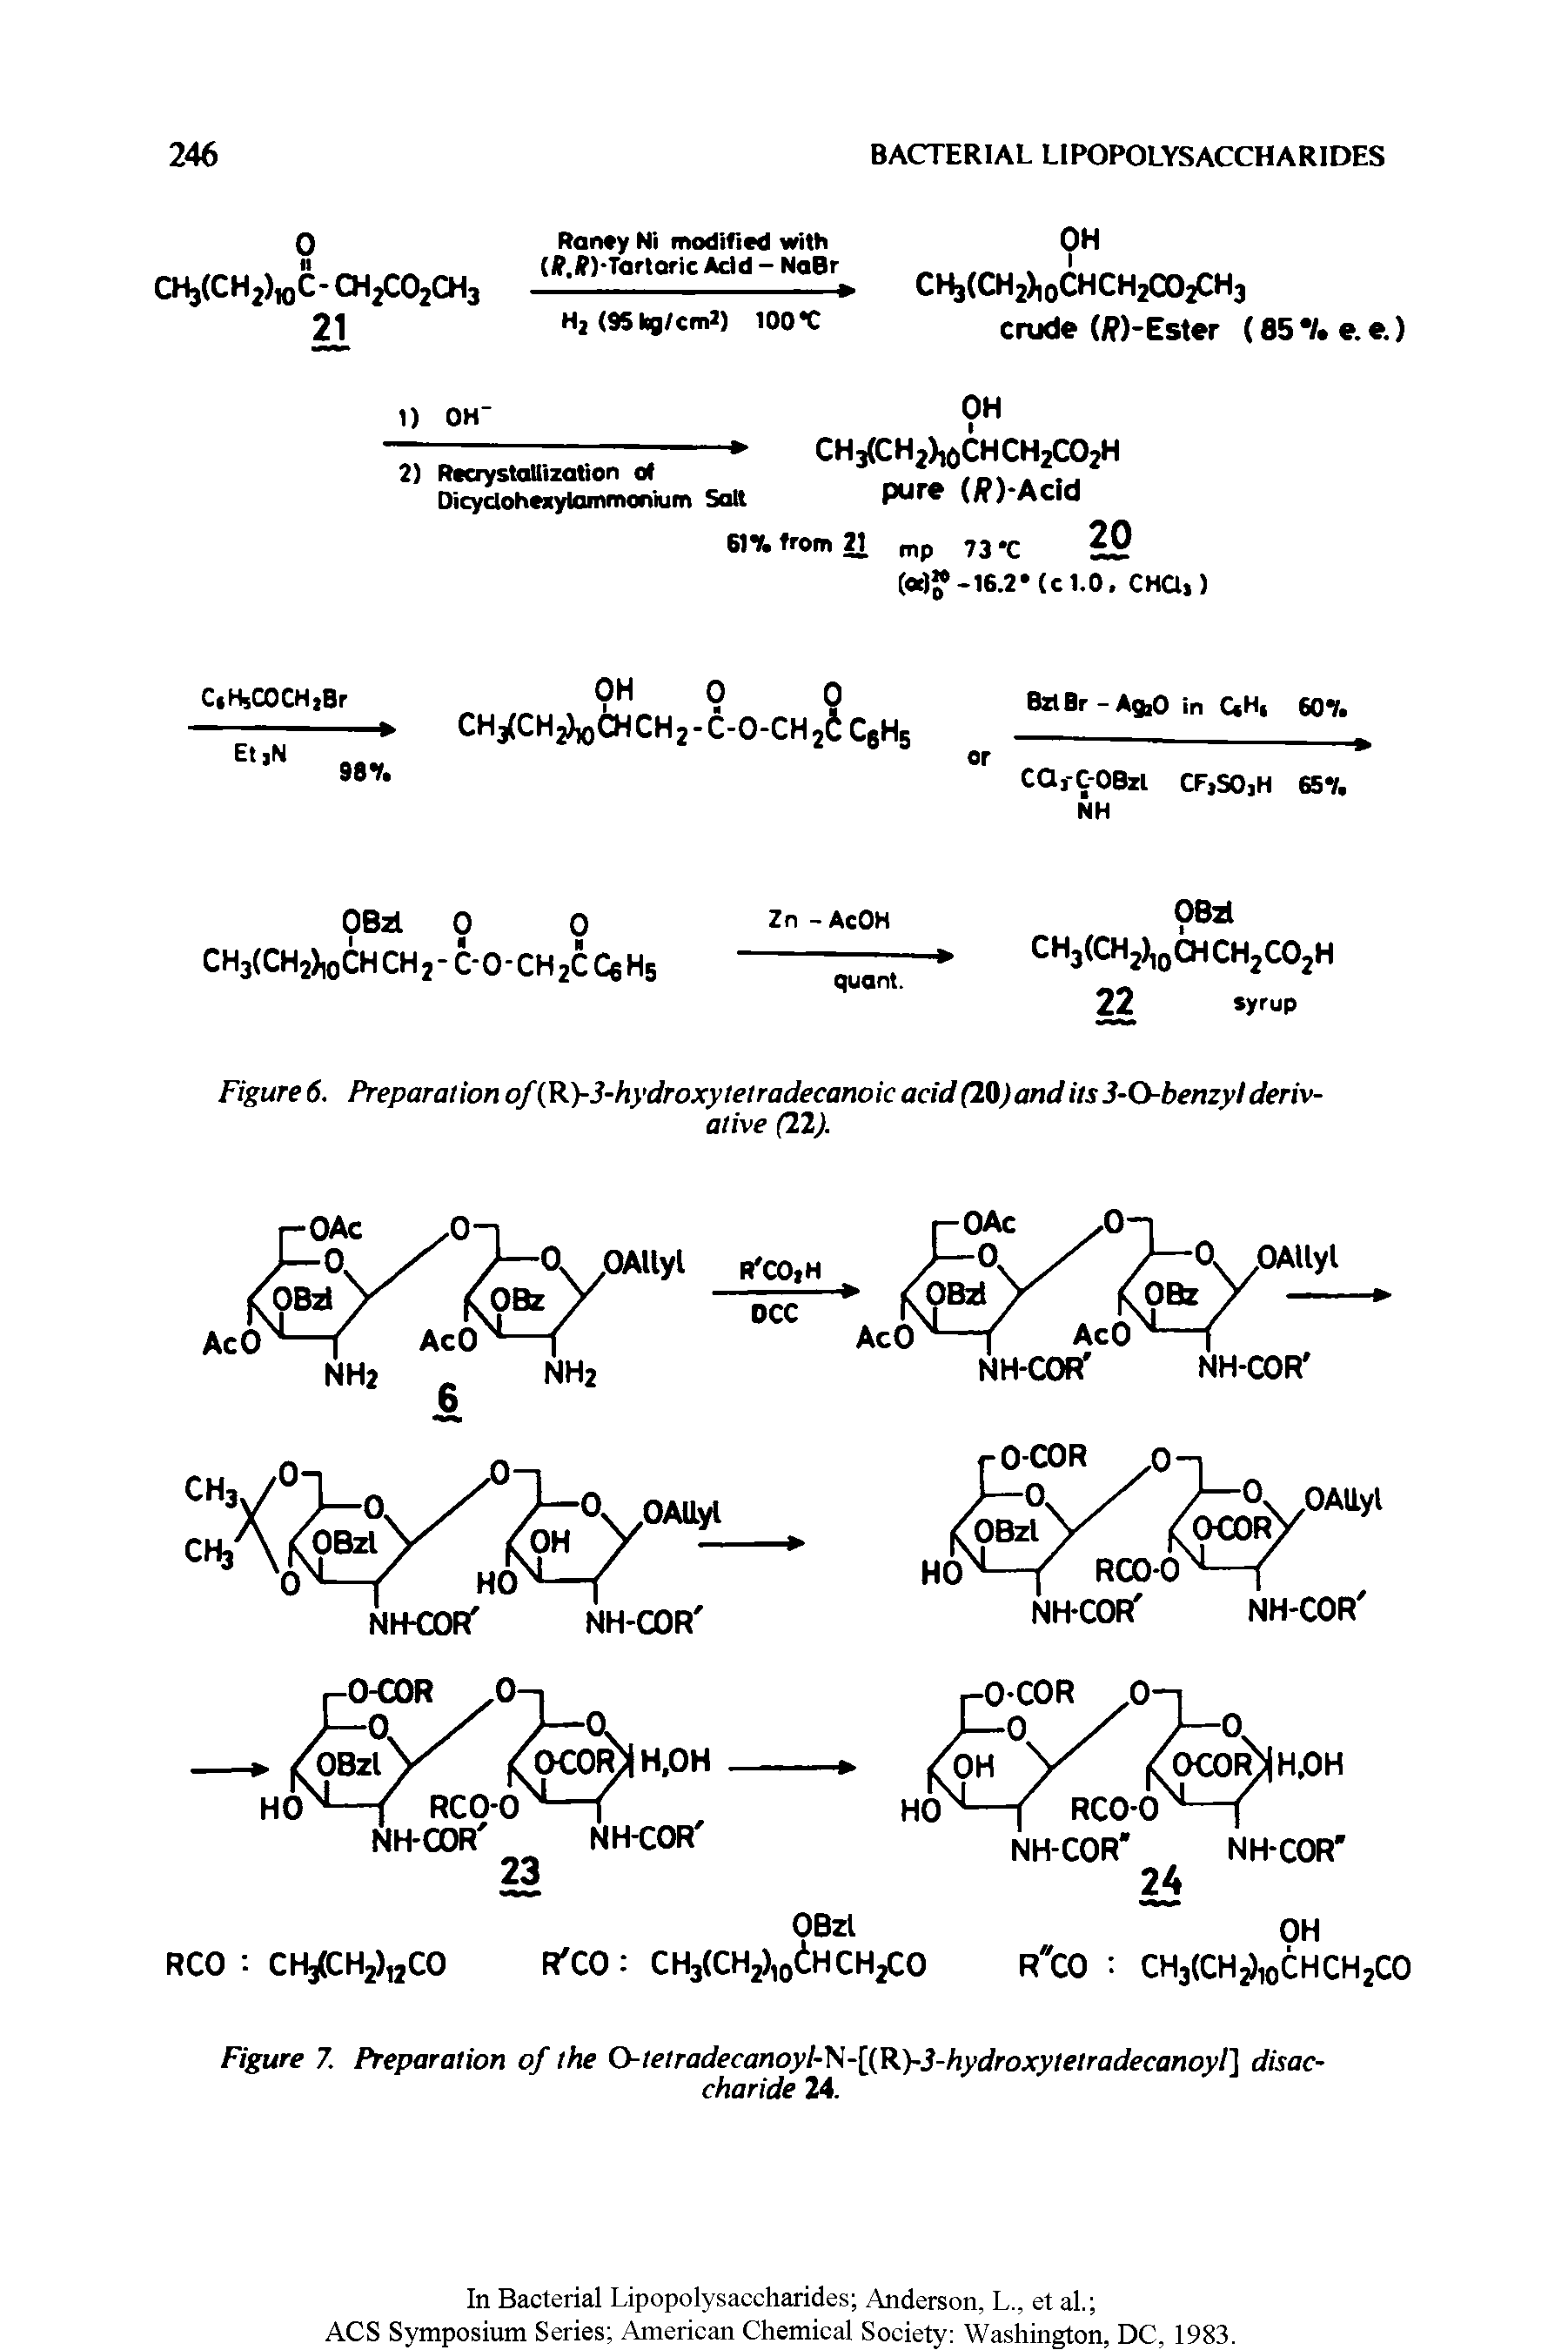 Figure 6. Preparation of(R)-3-hydroxytetradecanoic acid (20) and its 3-O-benzyl derivative (22).